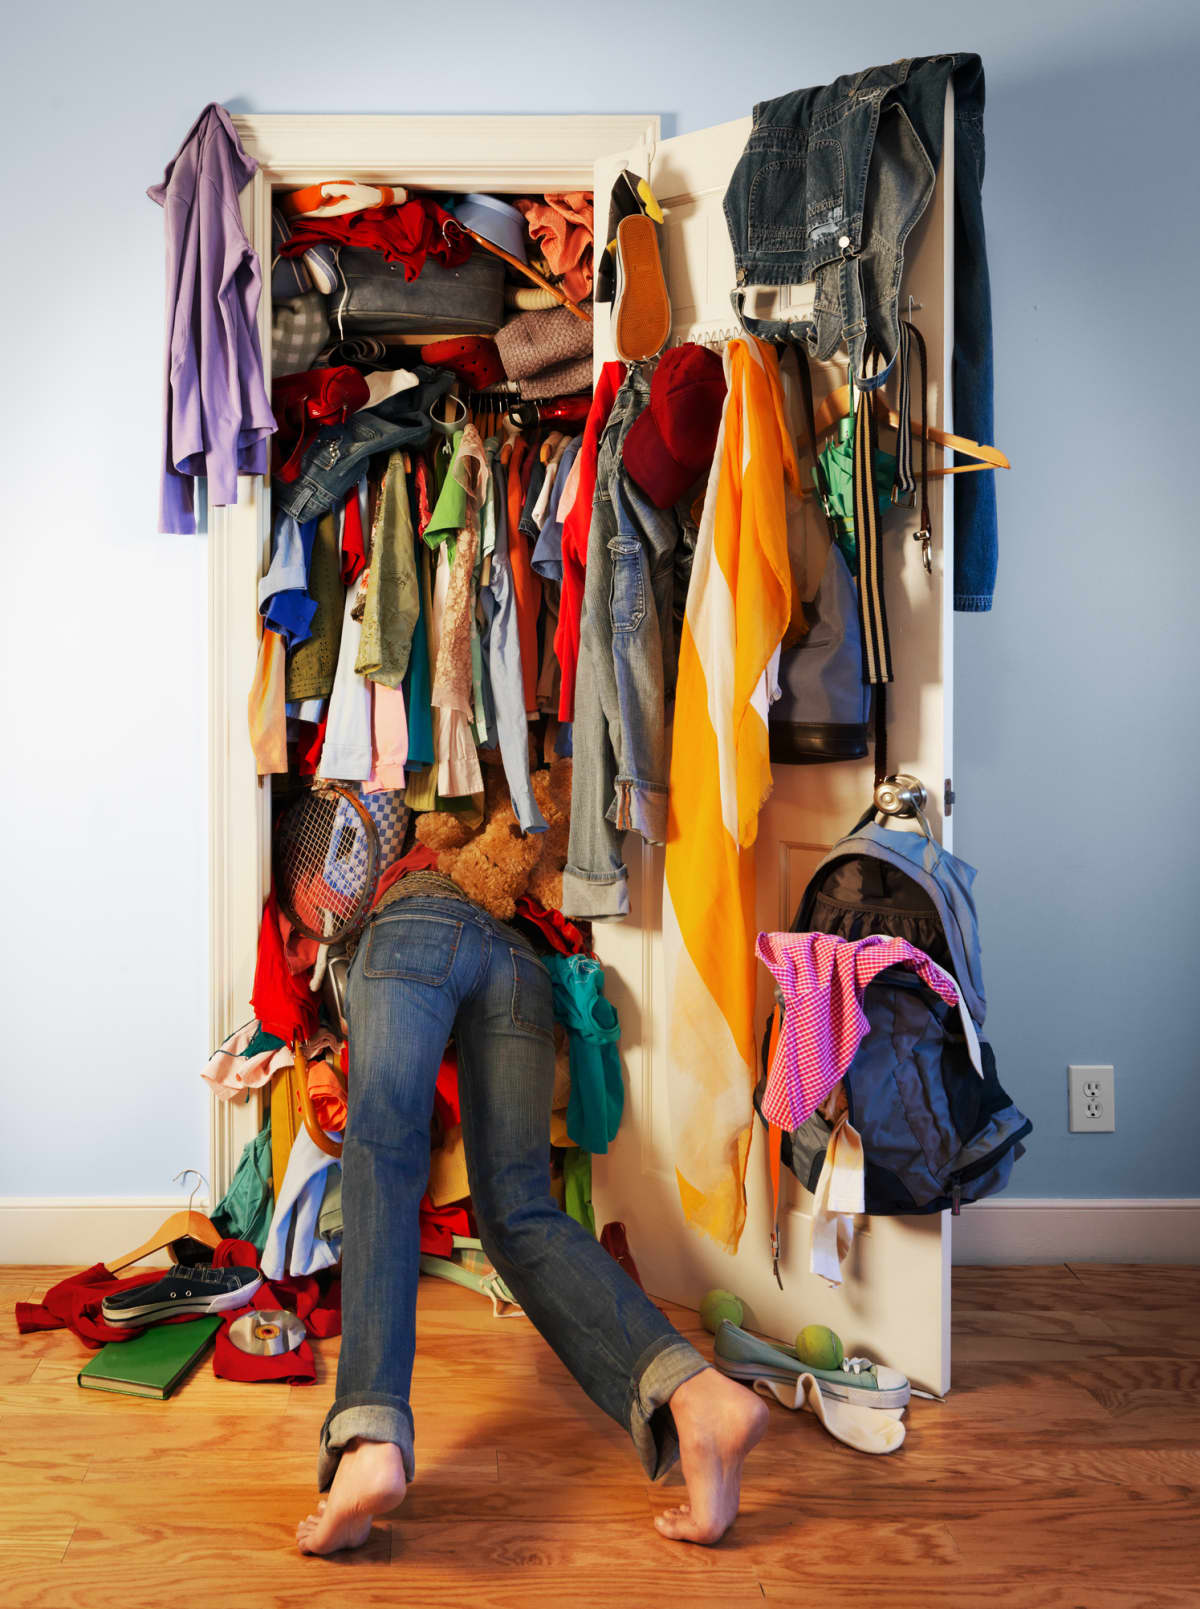 Young woman diving into her very messy, unorganized closet searching for something